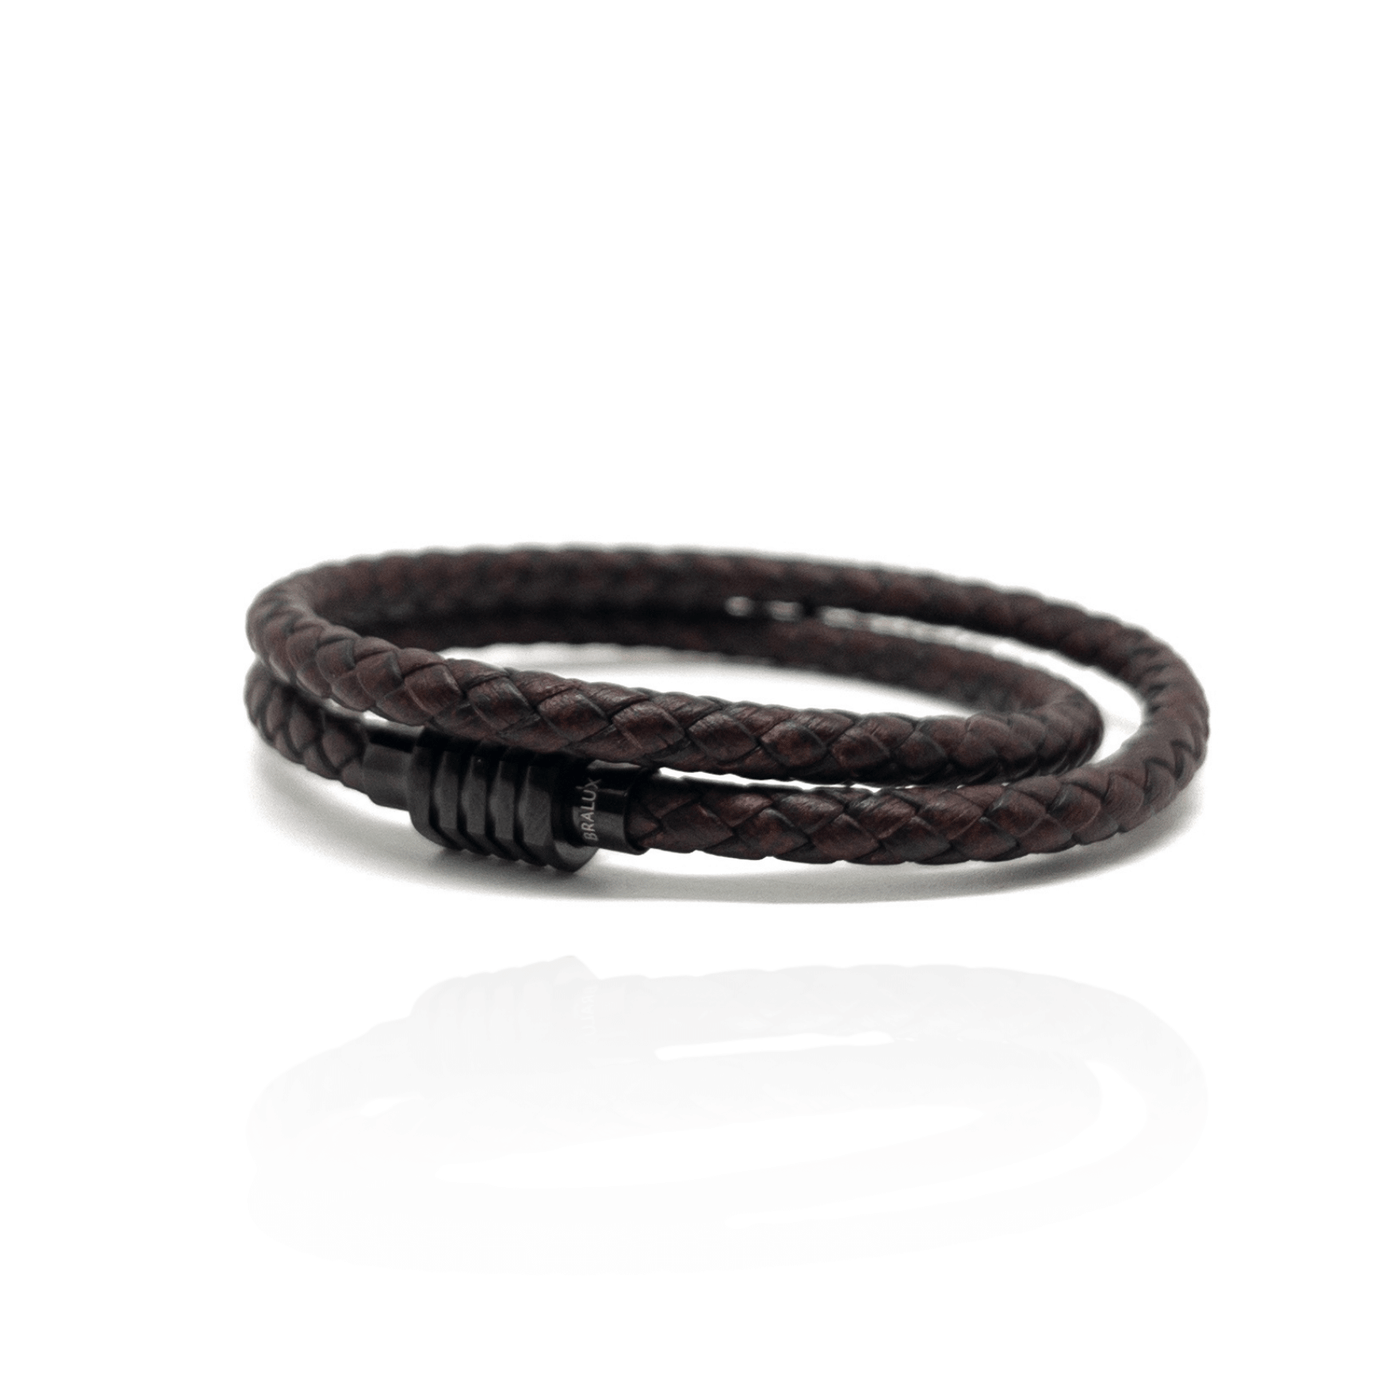 The Dark Brown duo and Black Plated Buckle Leather bracelet